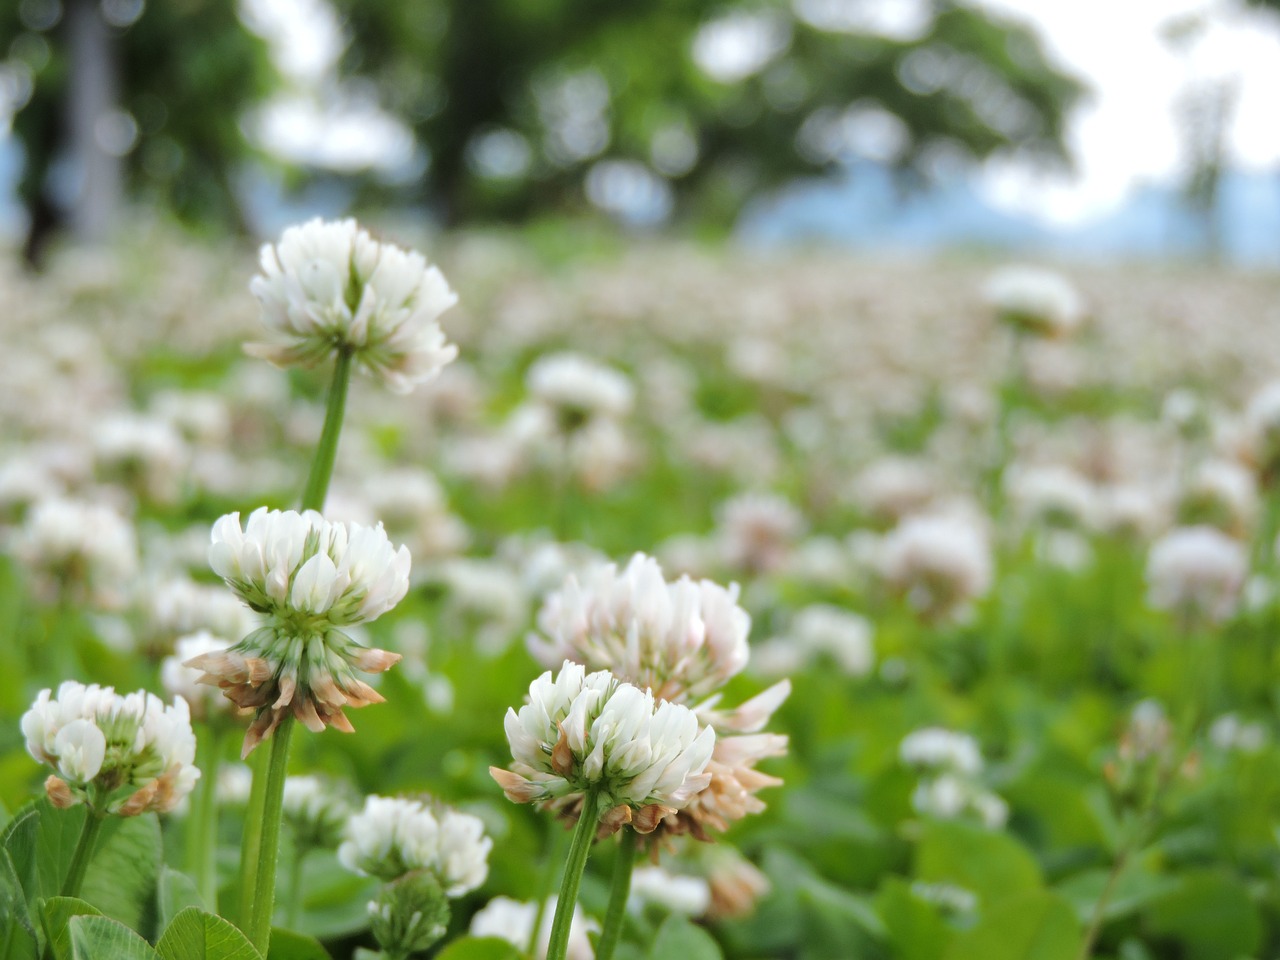 17 Cover Crops for Healthier and More Productive Soil